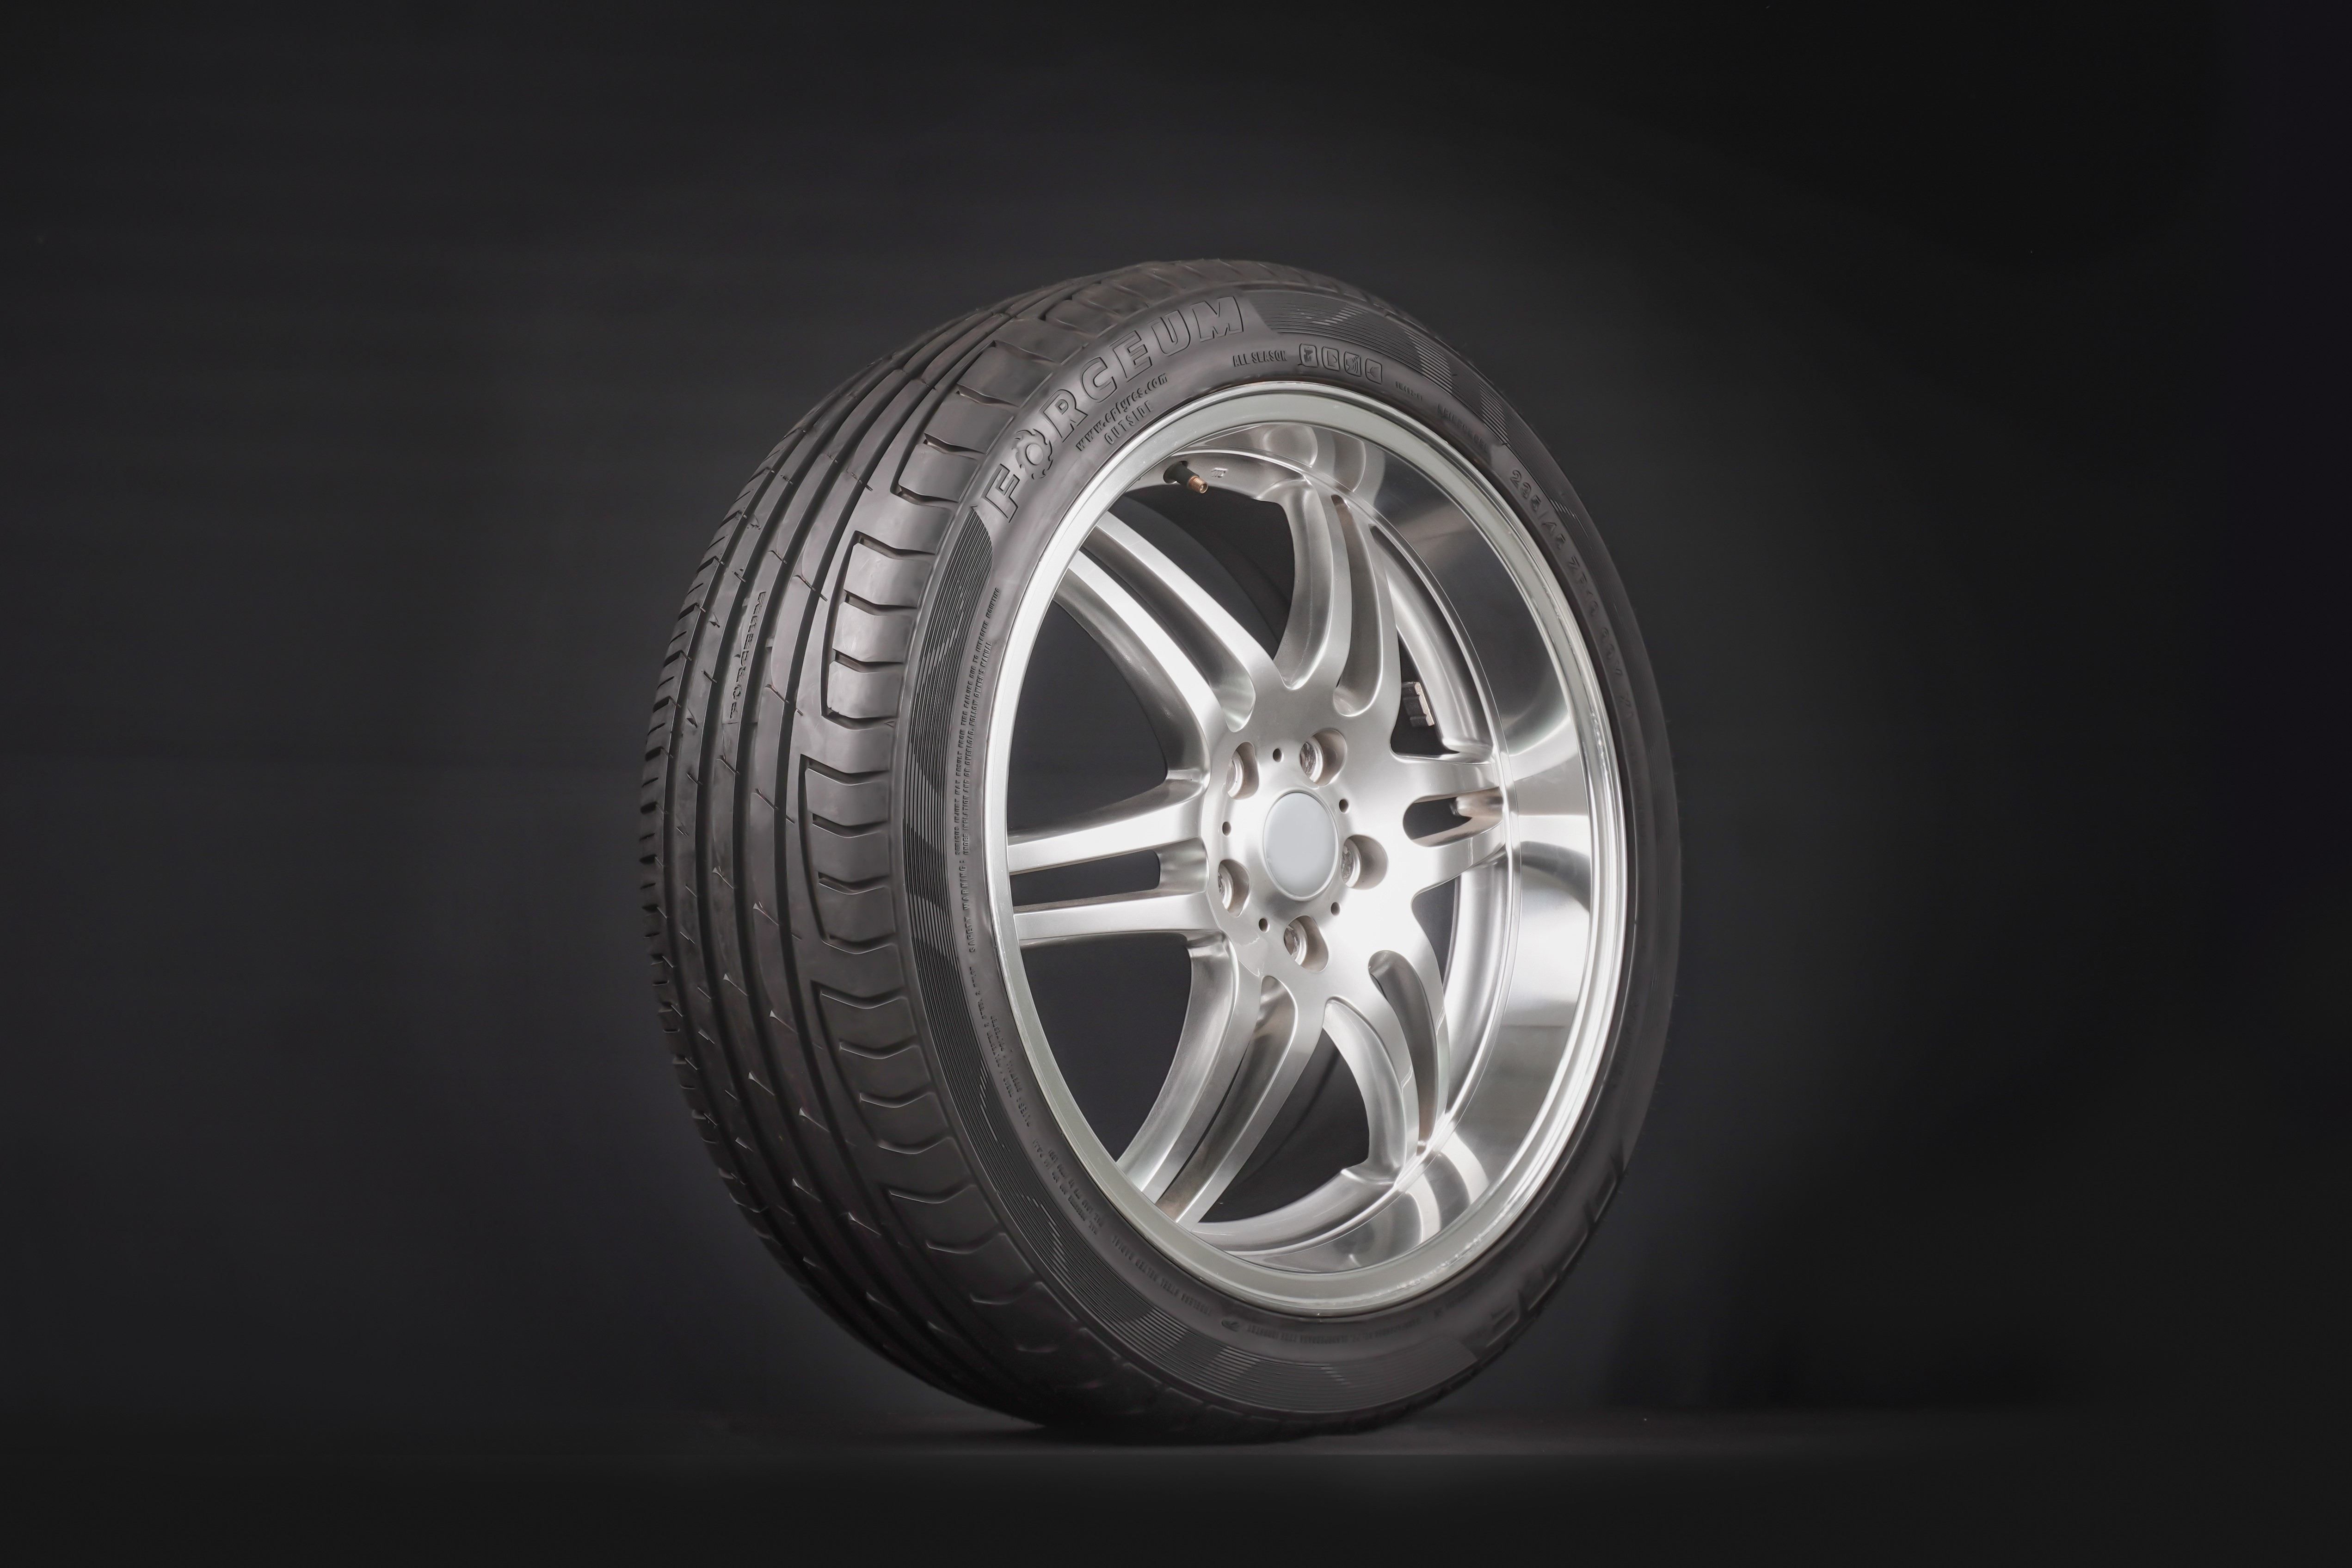 The Quiet Tire: Forceum Octa Keep The Noise Low